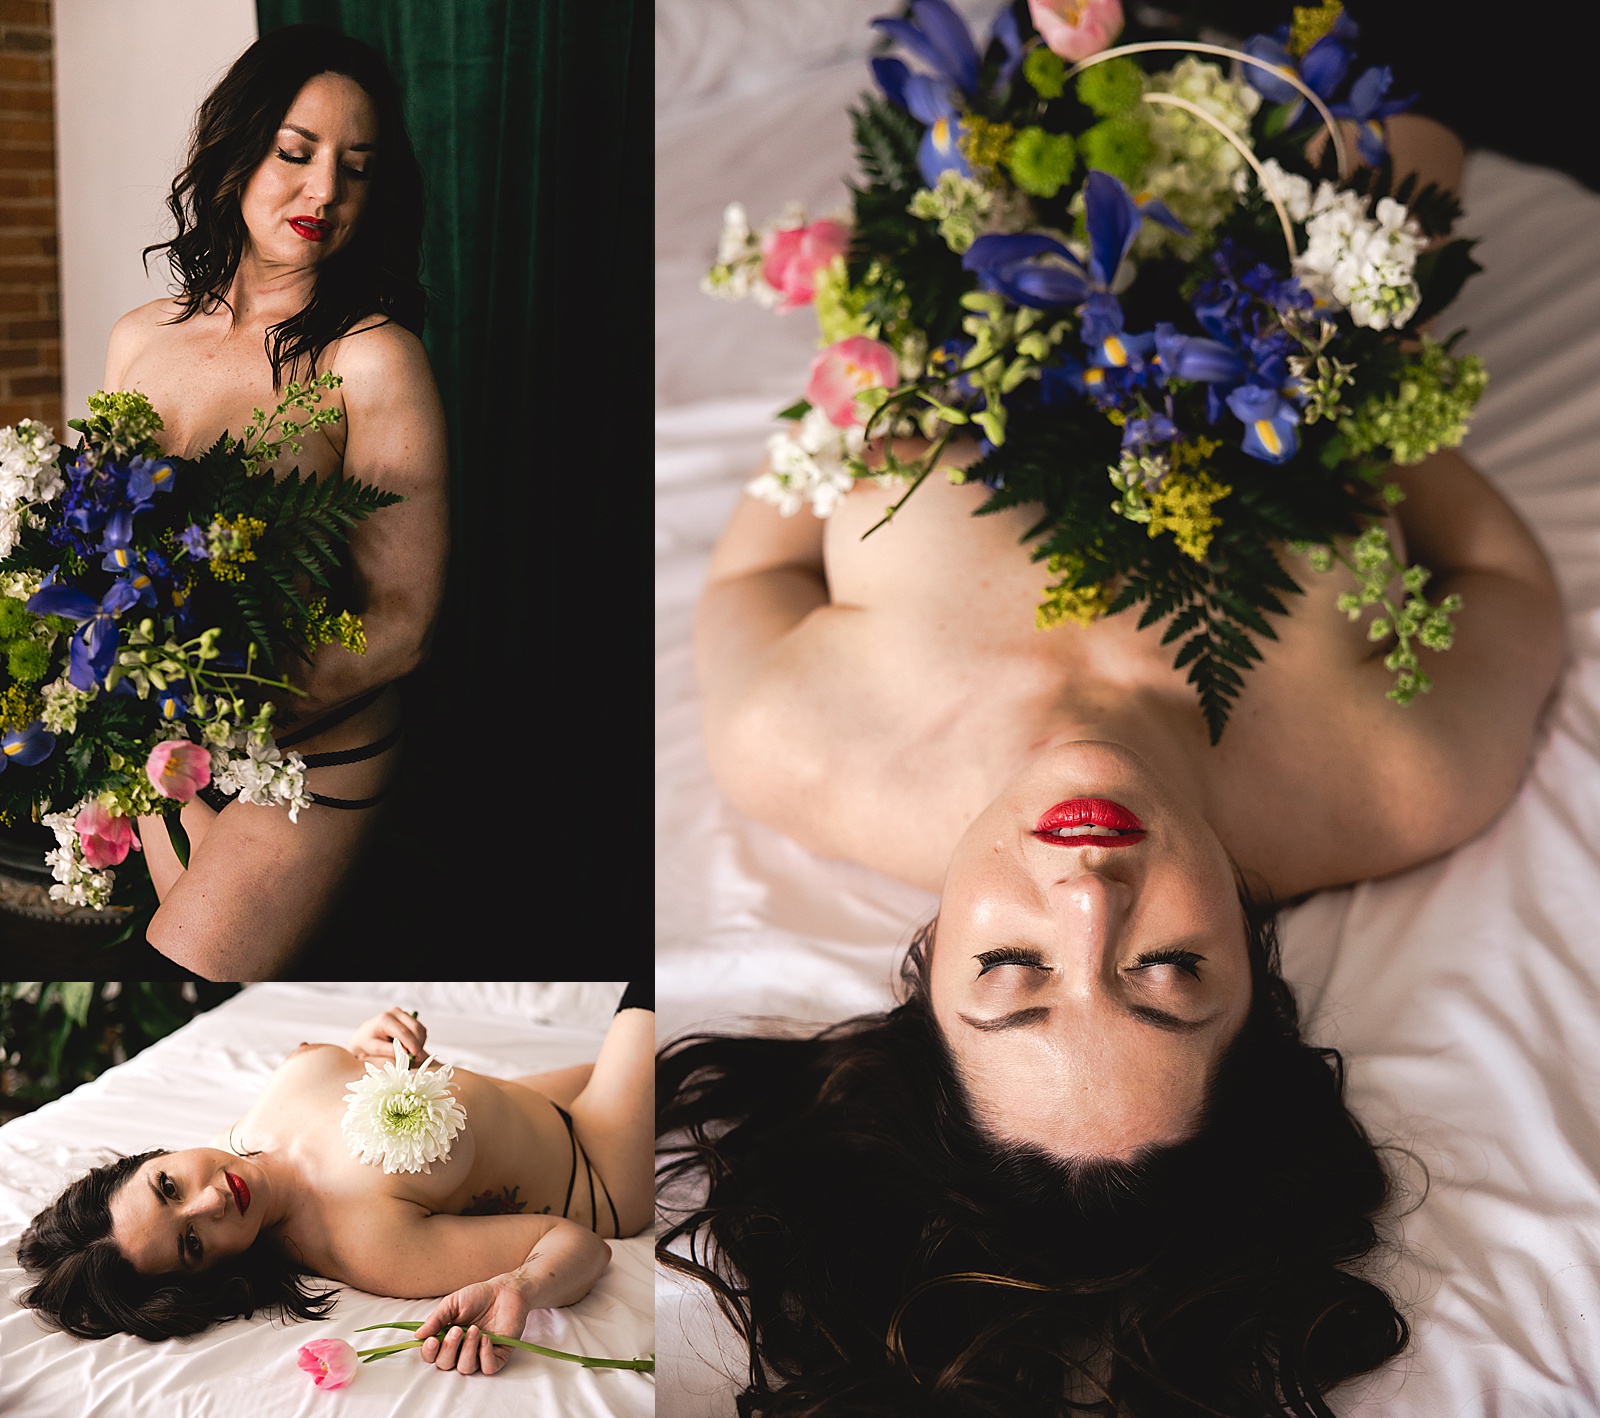 Woman holding large bouquet of flowers nude on a bed 